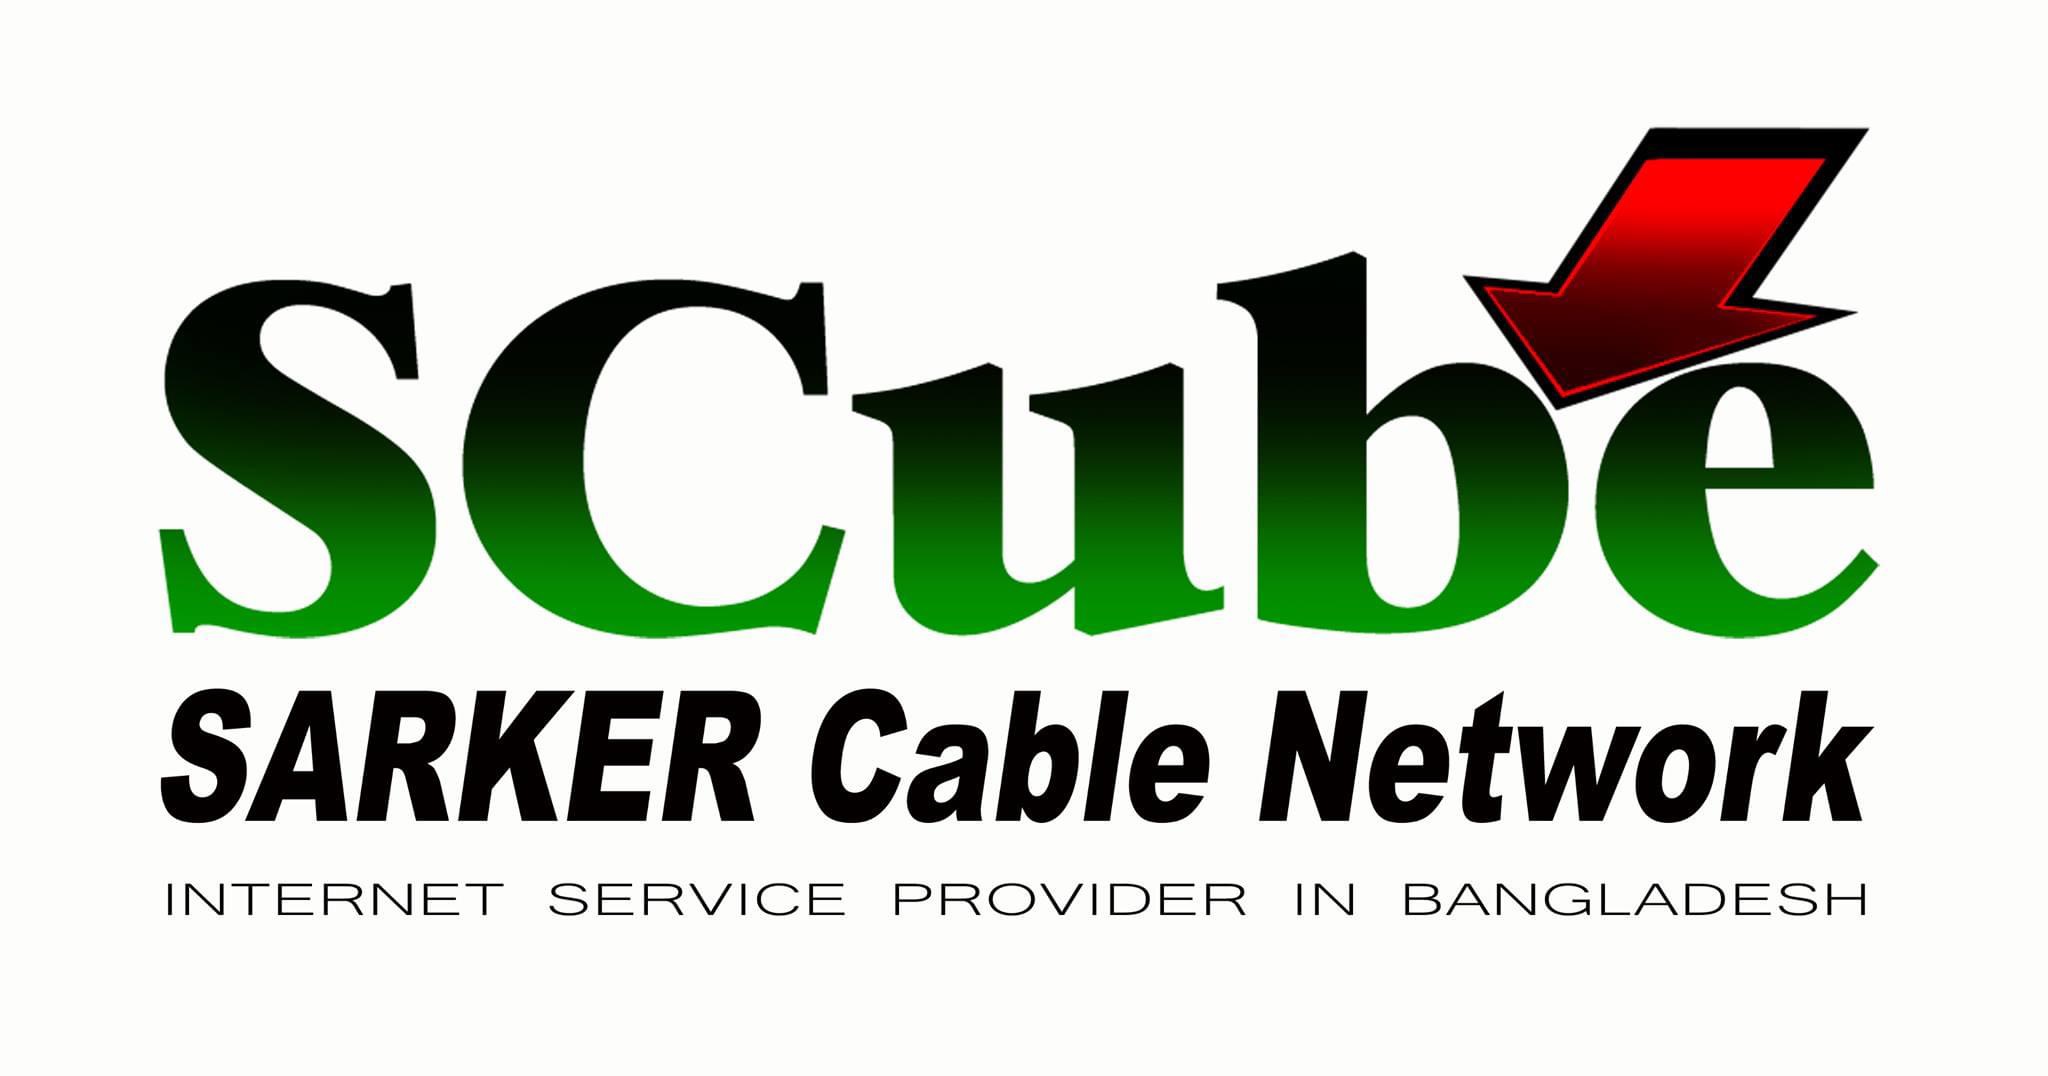 SCube SARKER Cable Network